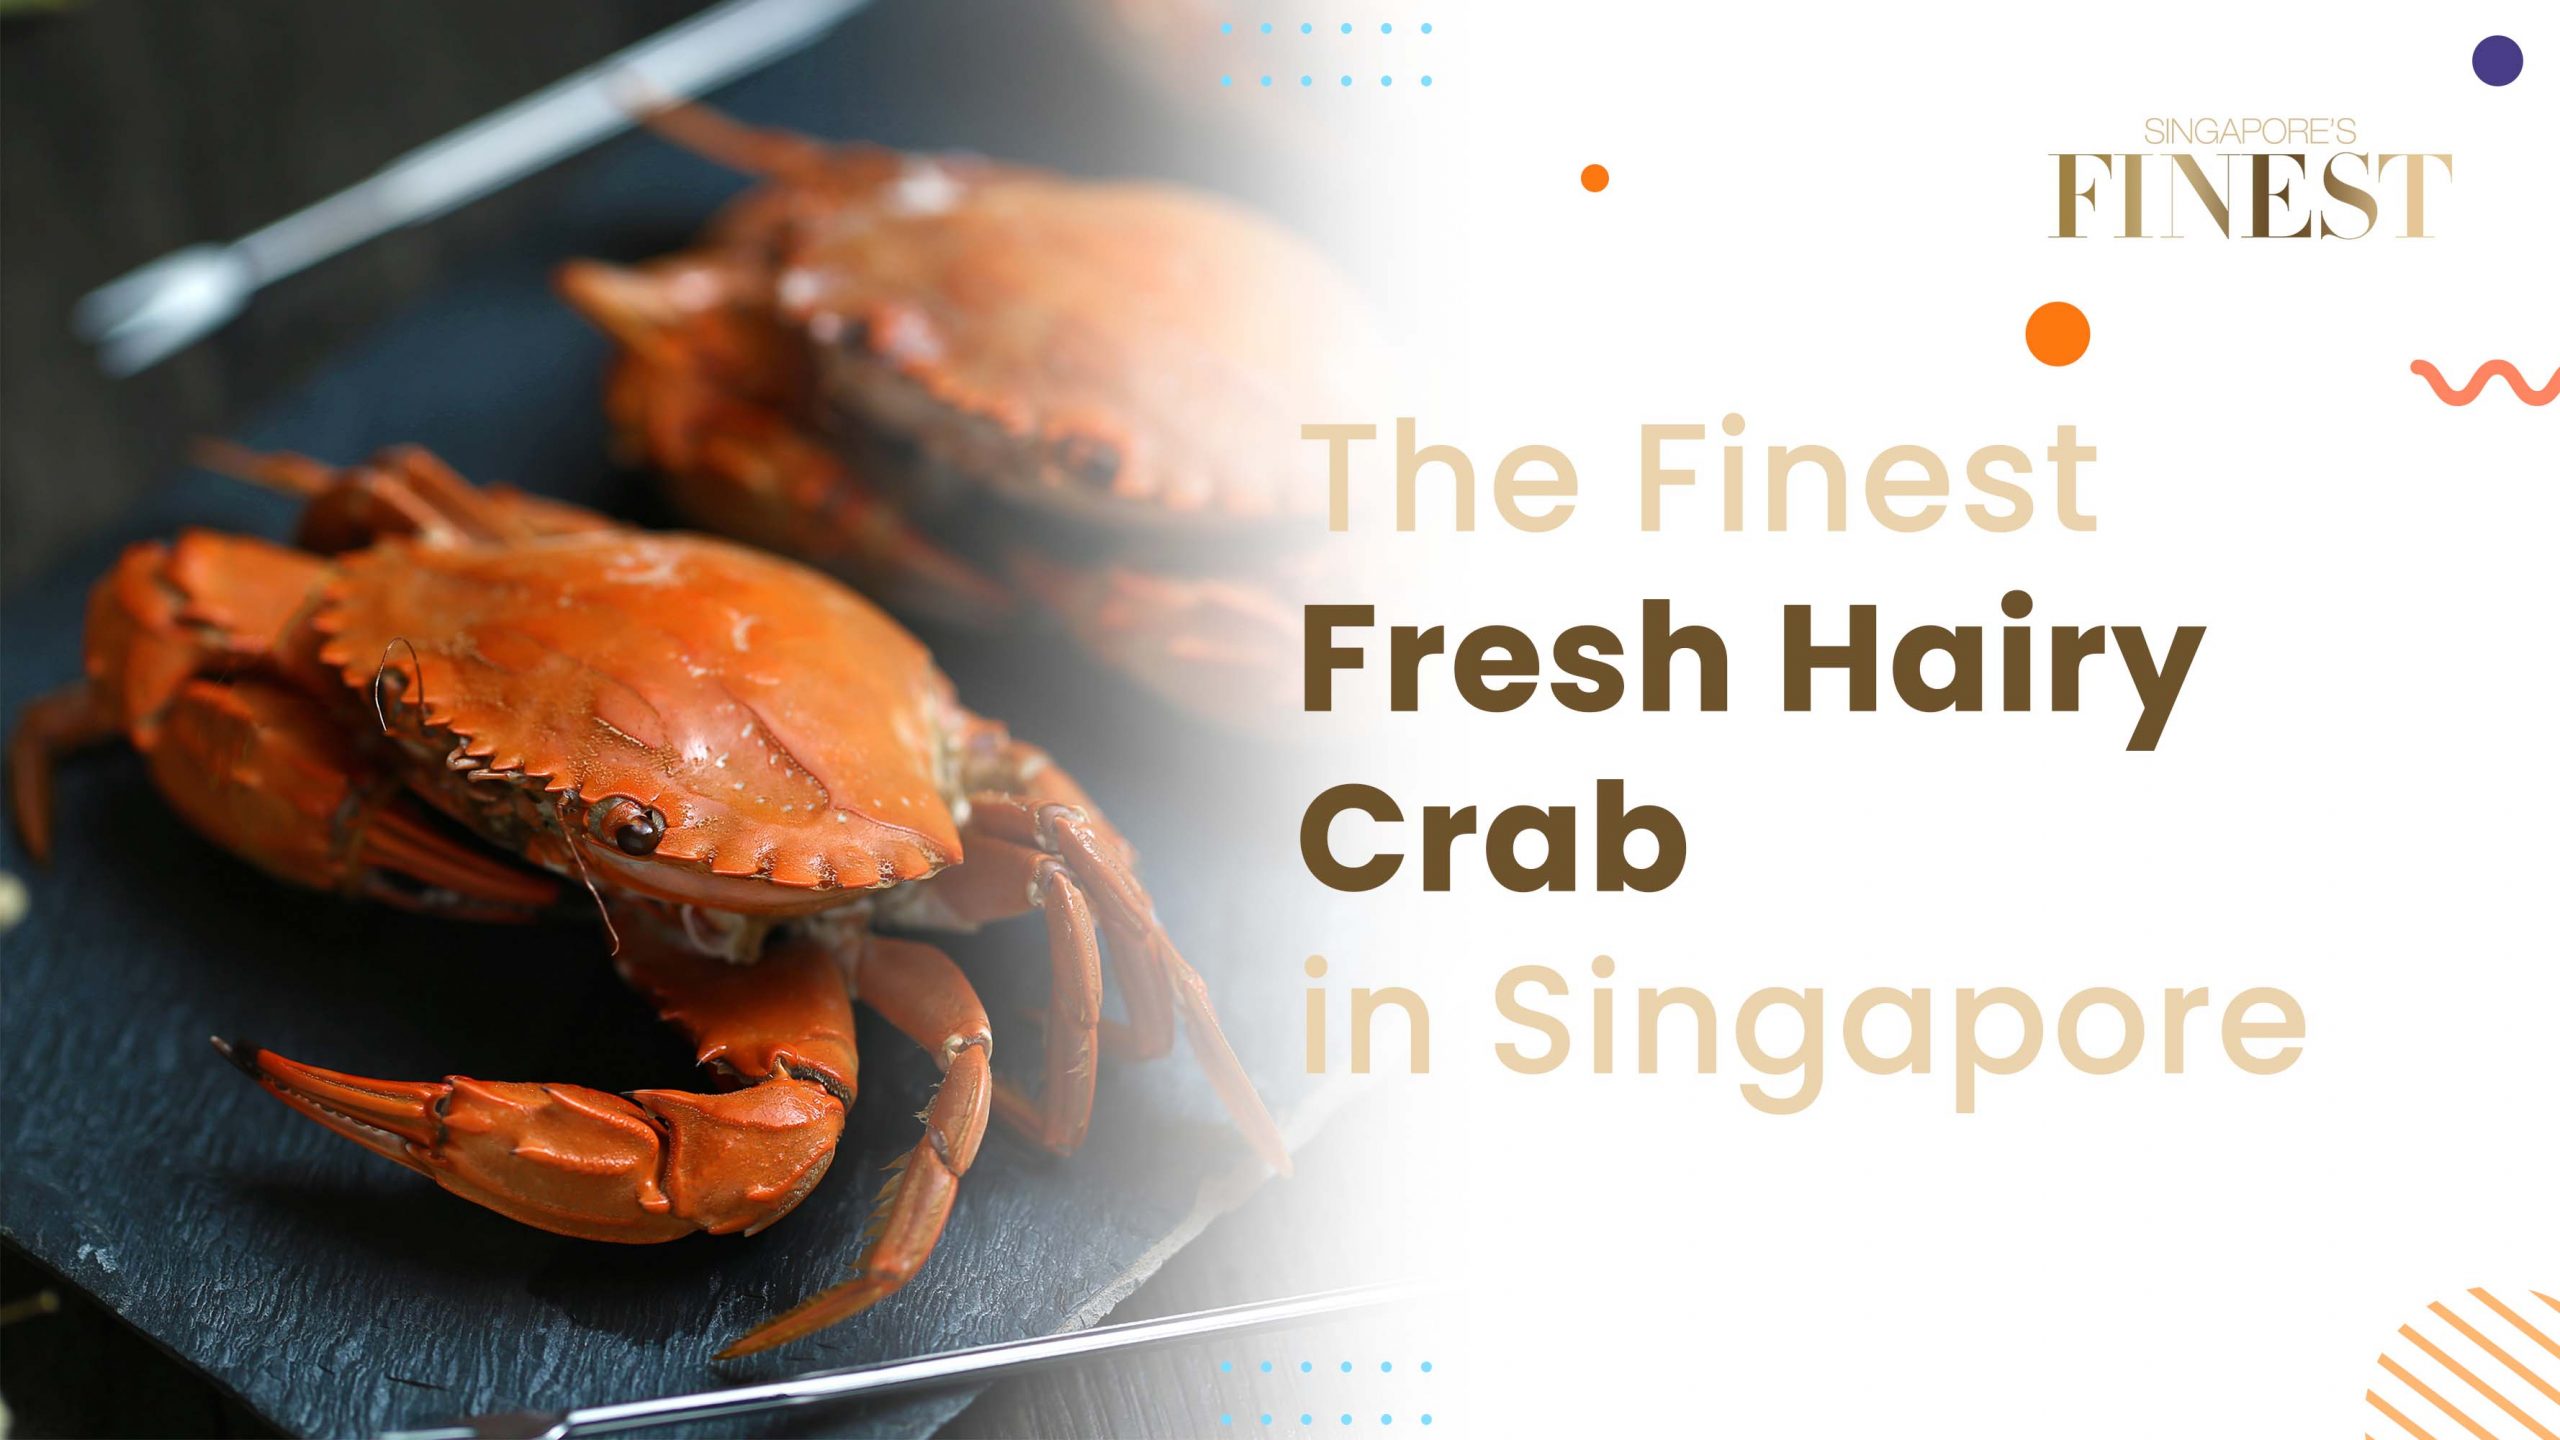 Finest Fresh Hairy Crab in Singapore